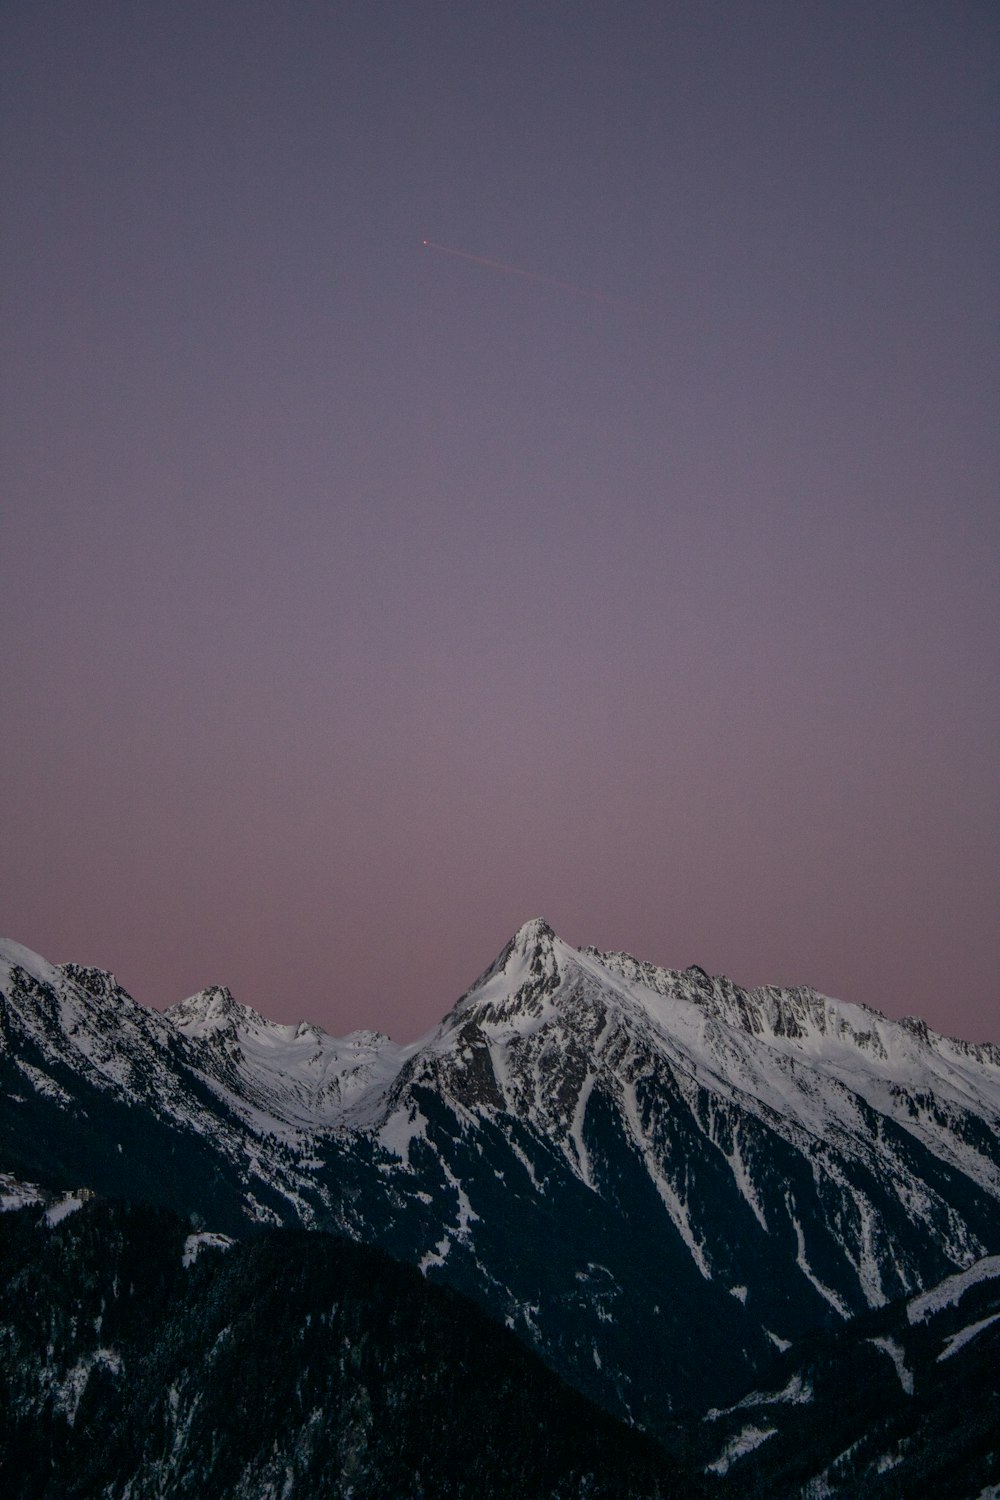 a plane flying over a snowy mountain range